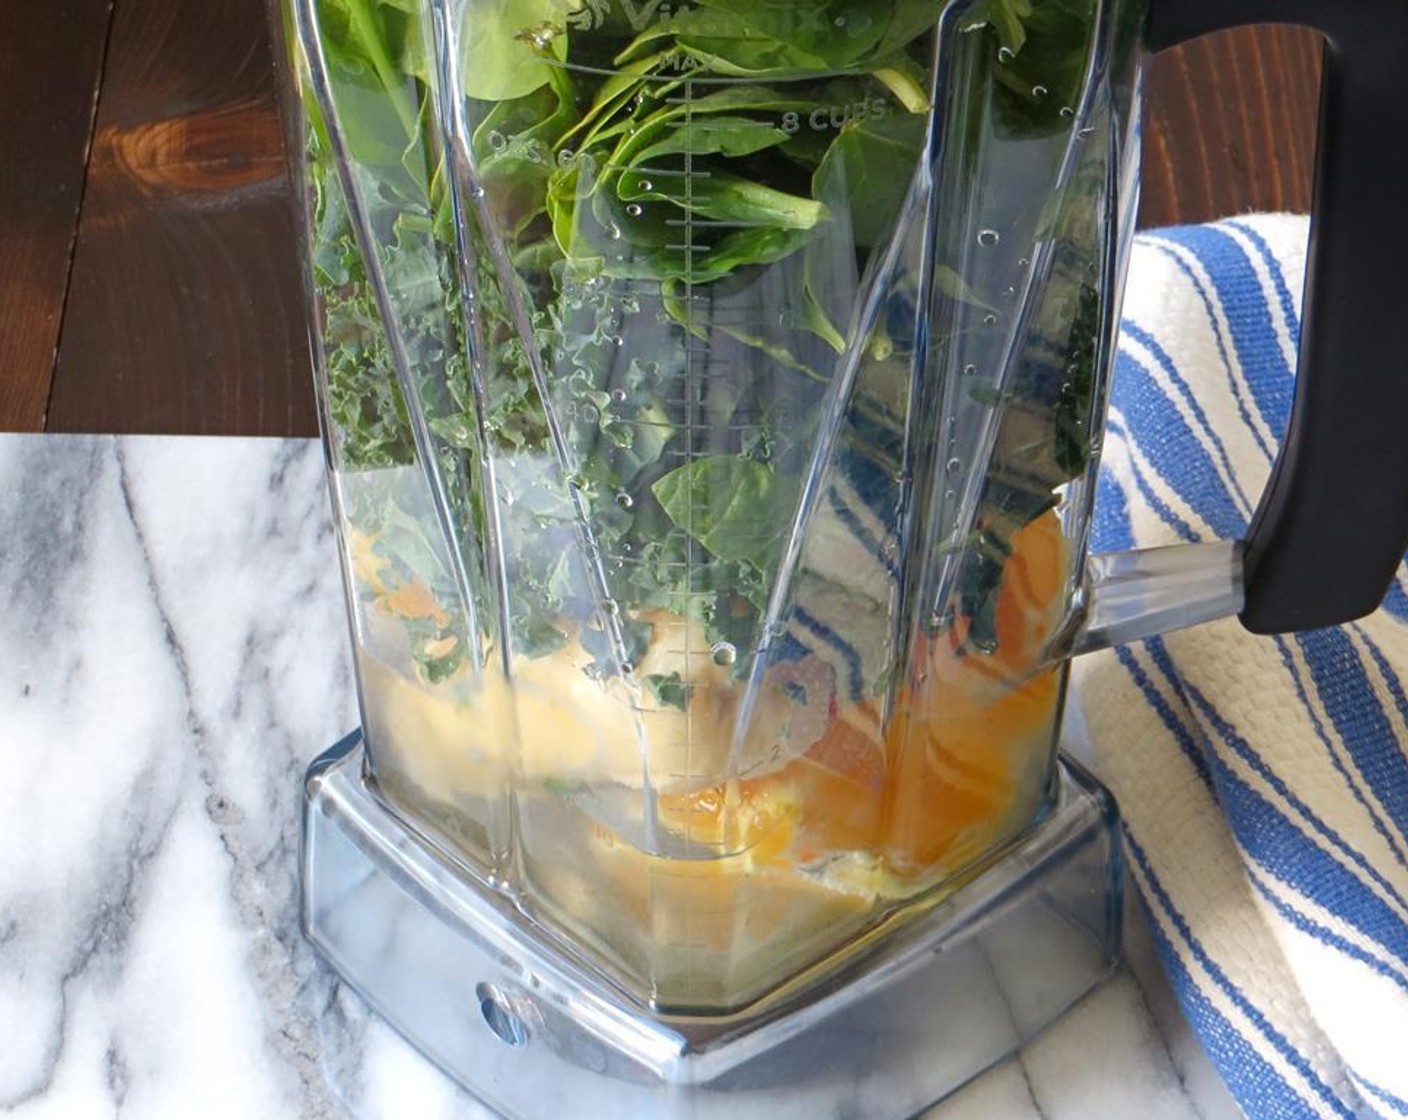 step 2 To your blender, add the orange, banana, Kale (2 cups), and Fresh Baby Spinach (1 cup). Pour the Ice (1/2 cup) and Water (1/2 cup) over the fruits and vegetables. Secure the lid tightly on the blender.